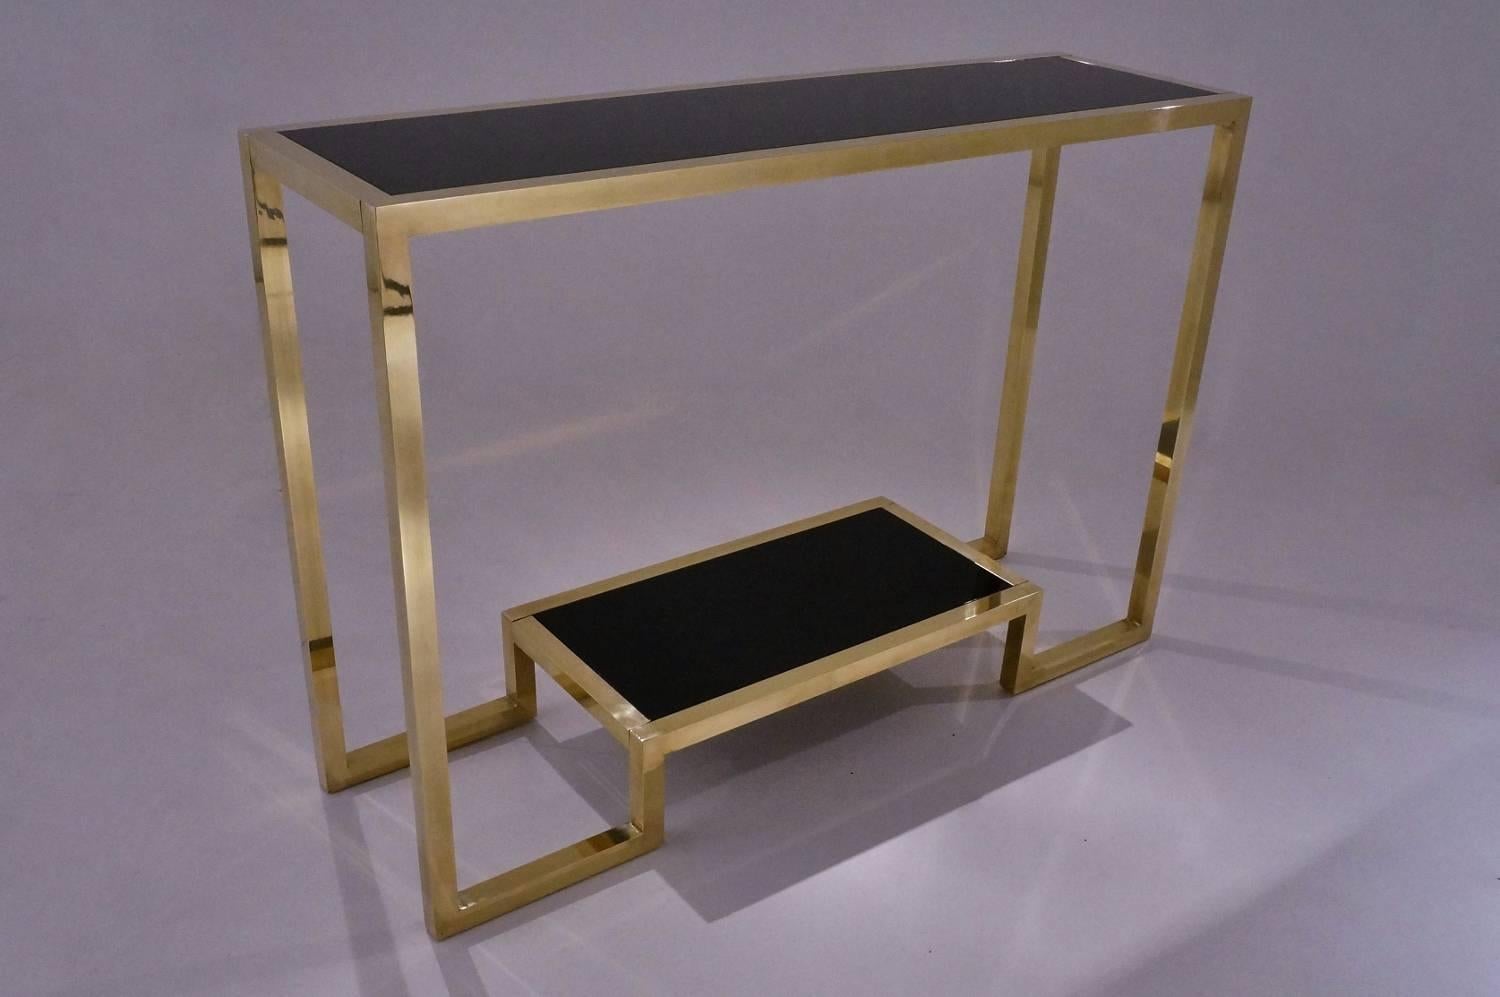 Pair of brass console tables with a black lacquer top and shelf in the style of Guy Lefevre, circa 1990s, French.

This pair of console tables have been thoroughly cleaned respecting the original patina. They are ready to use.

In this design,